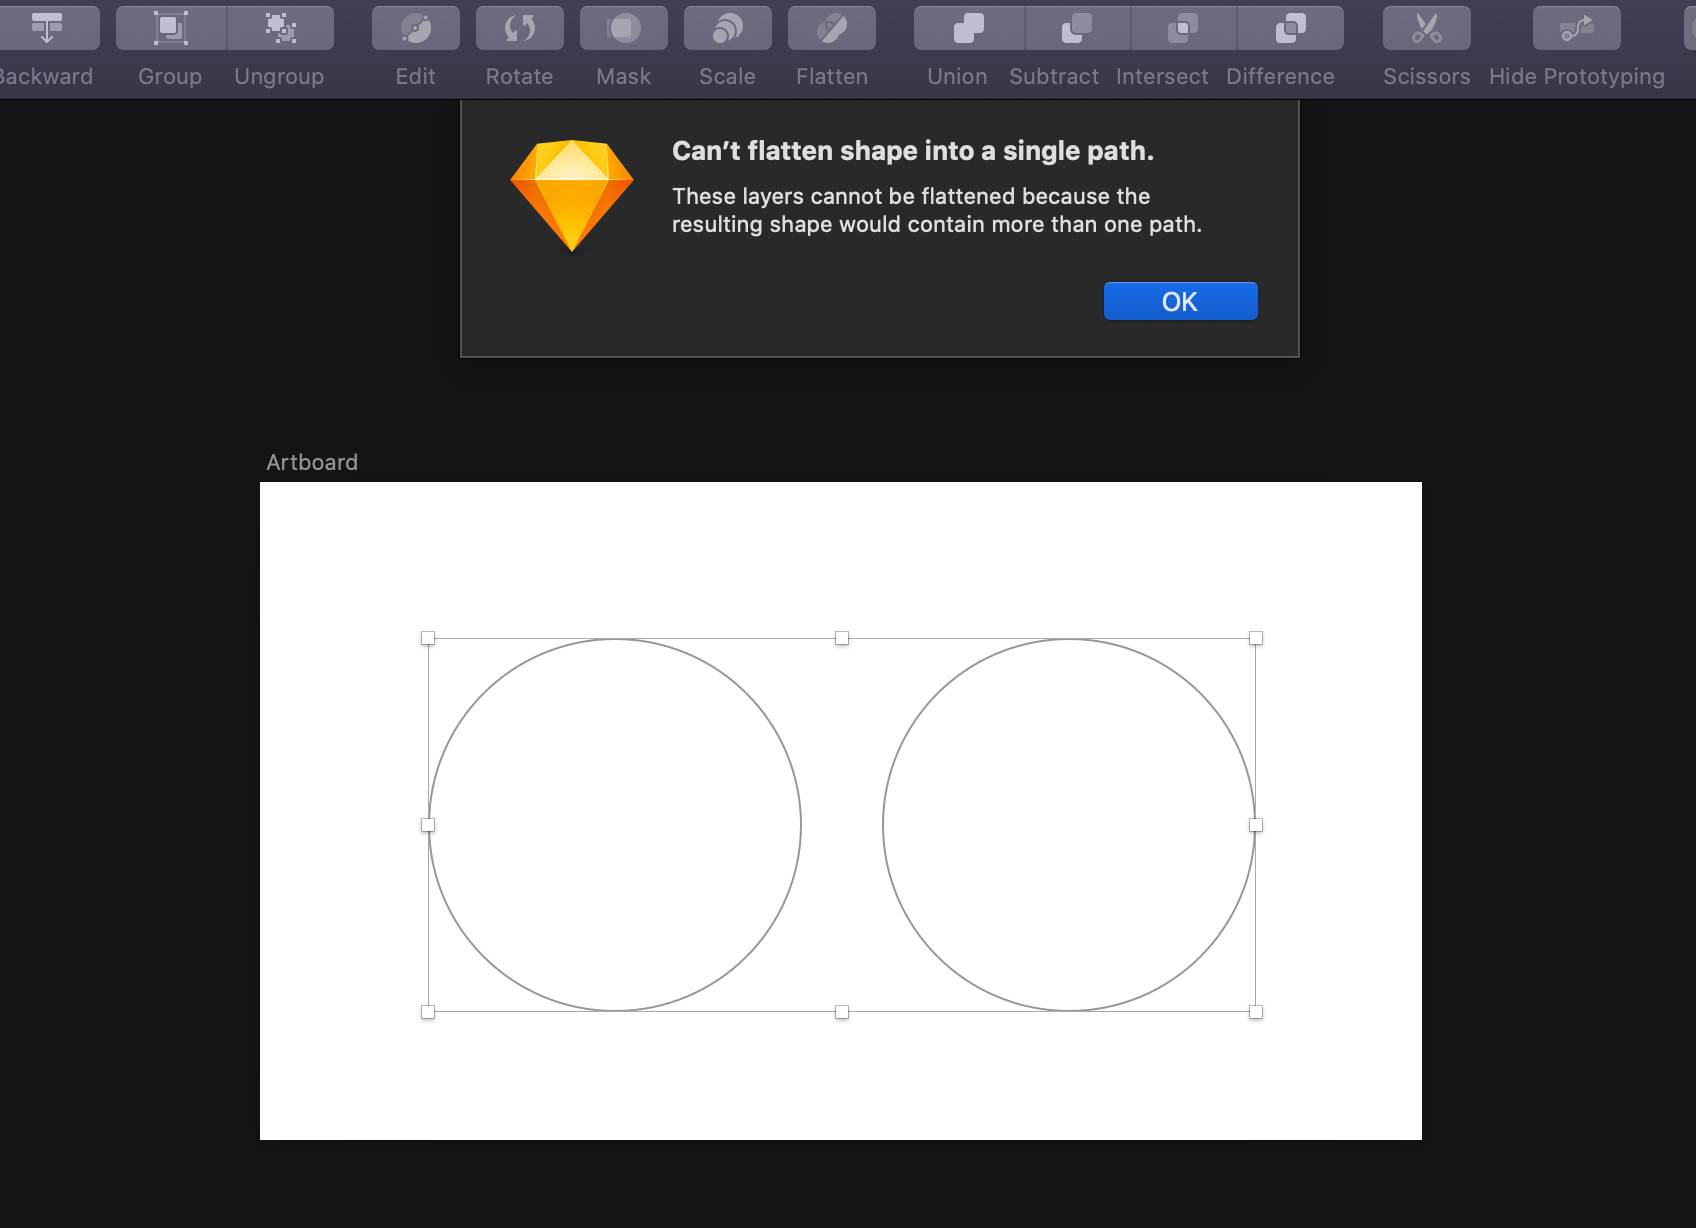 An attempt to flatten two circles that don’t intersect. We get an error since Sketch can’t flatten the shape into one path.